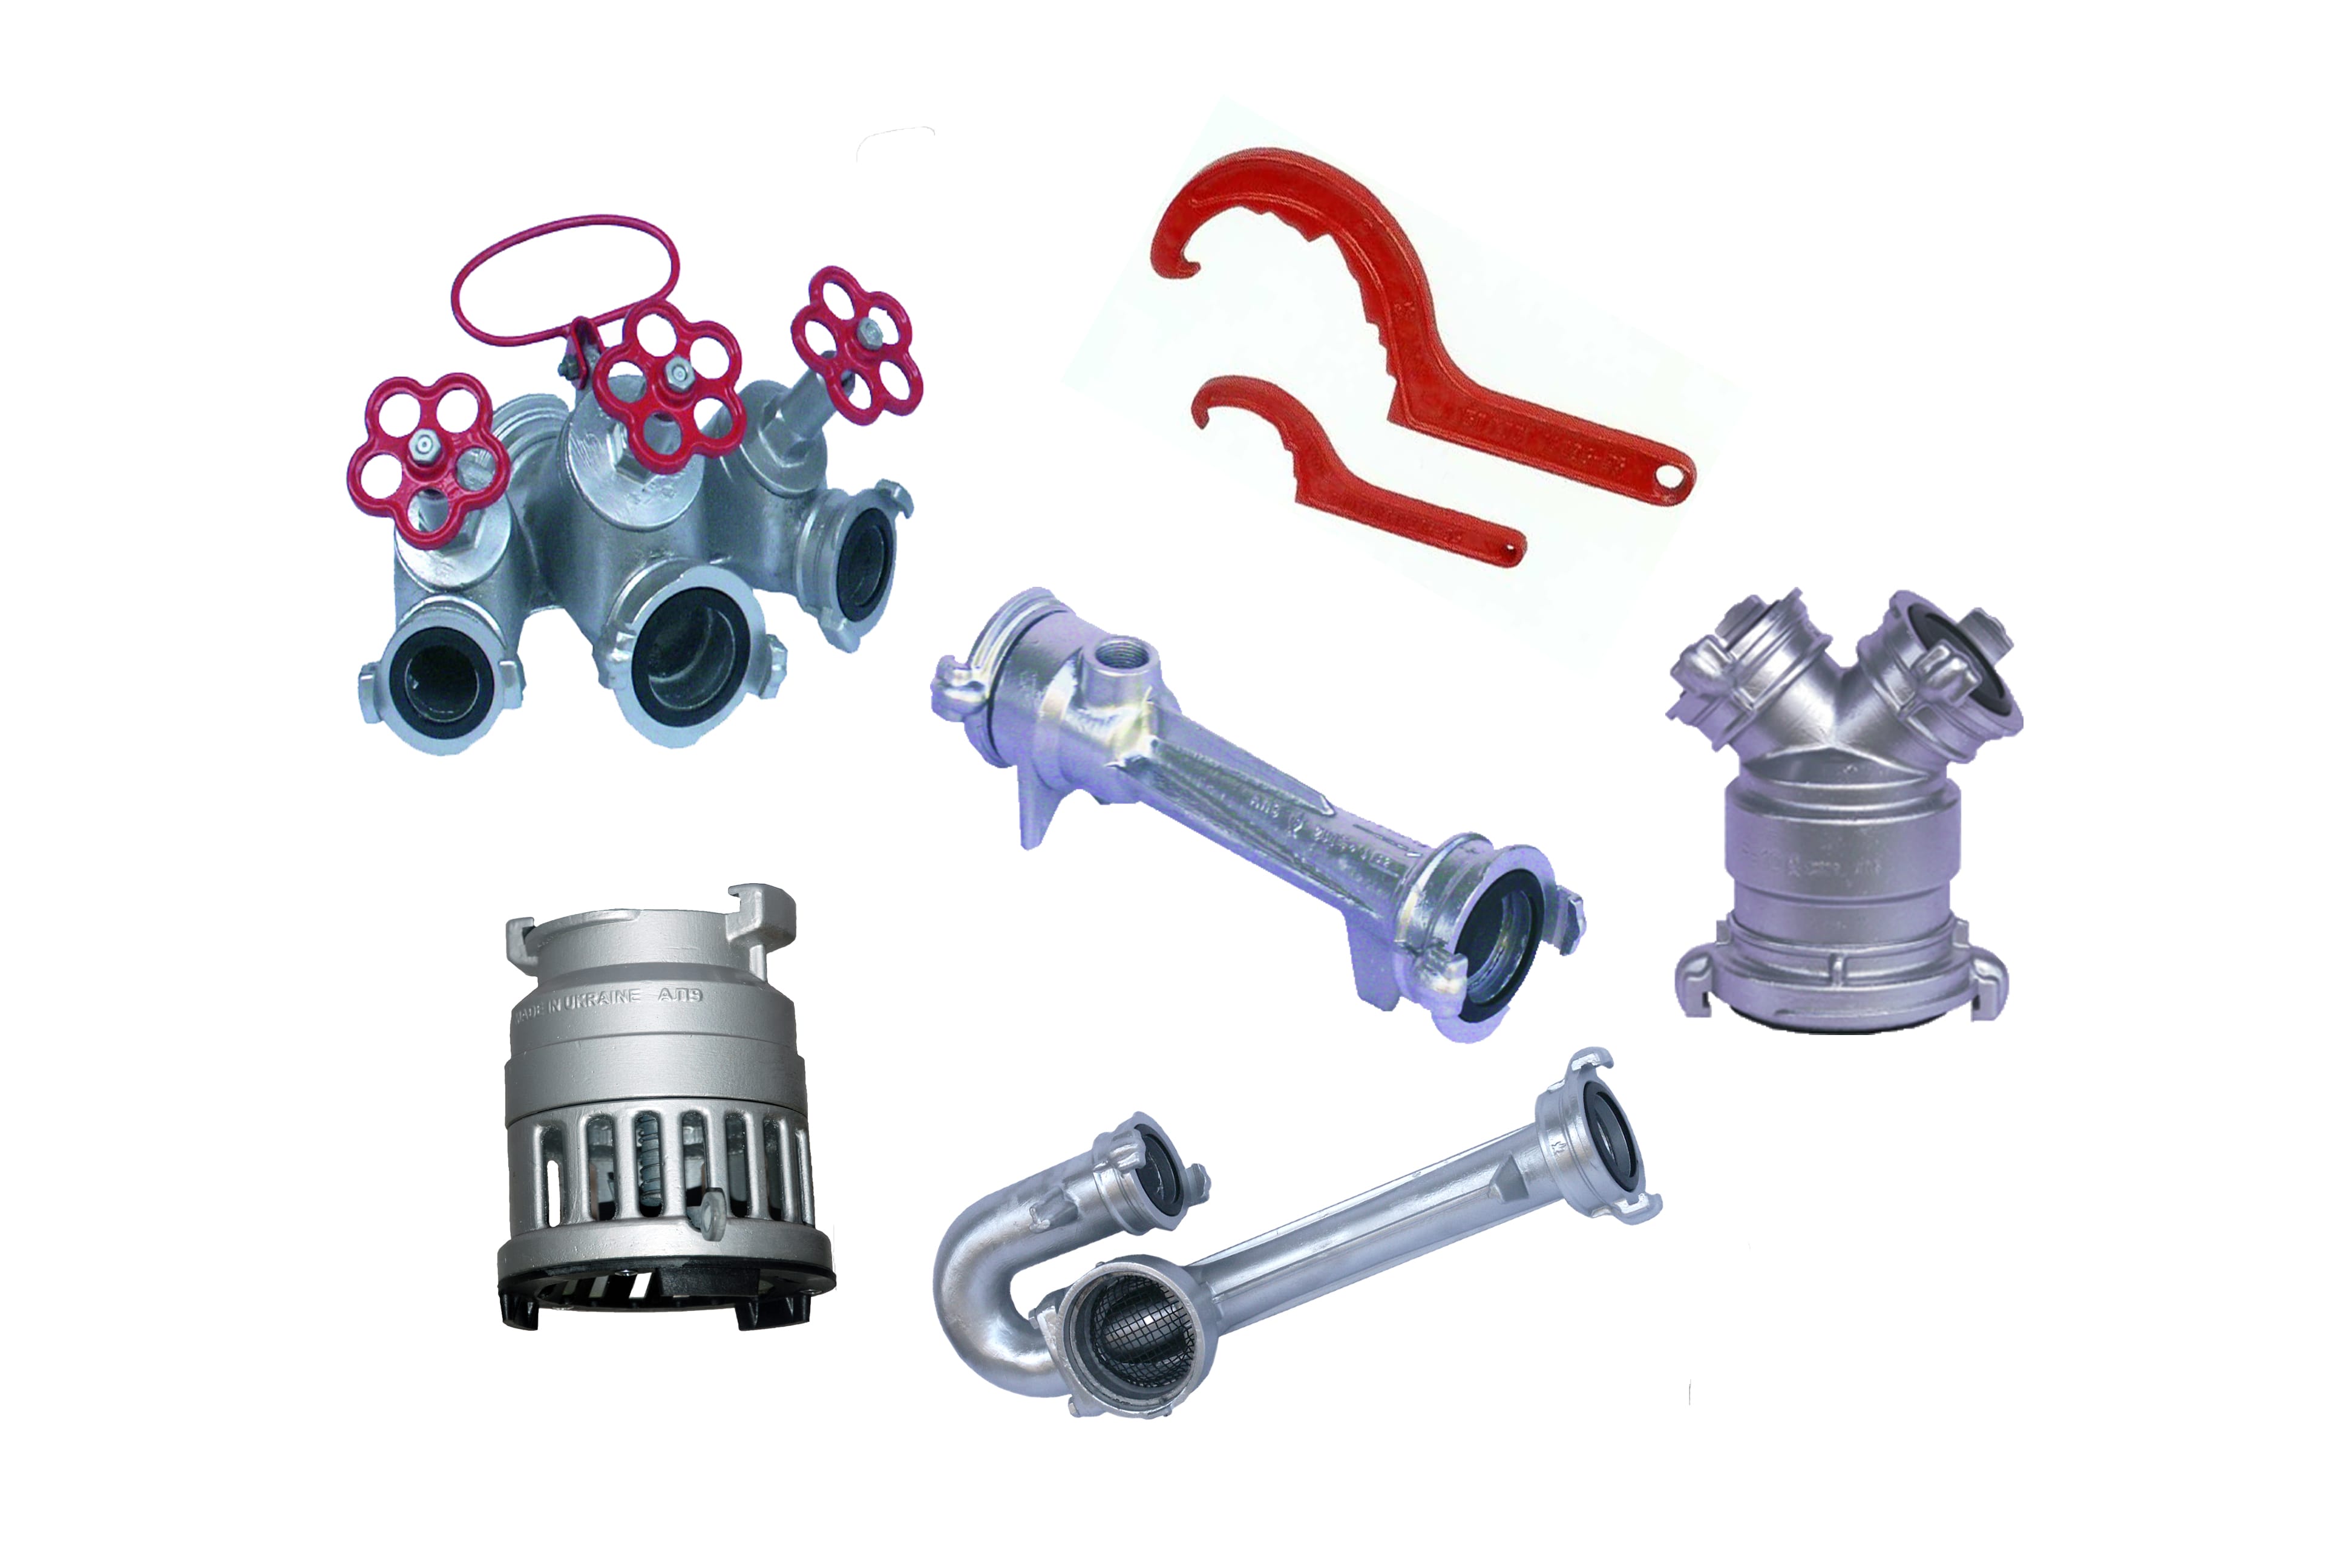 Branches, reservoirs, nets, keys, hydraulic elevators, adapters